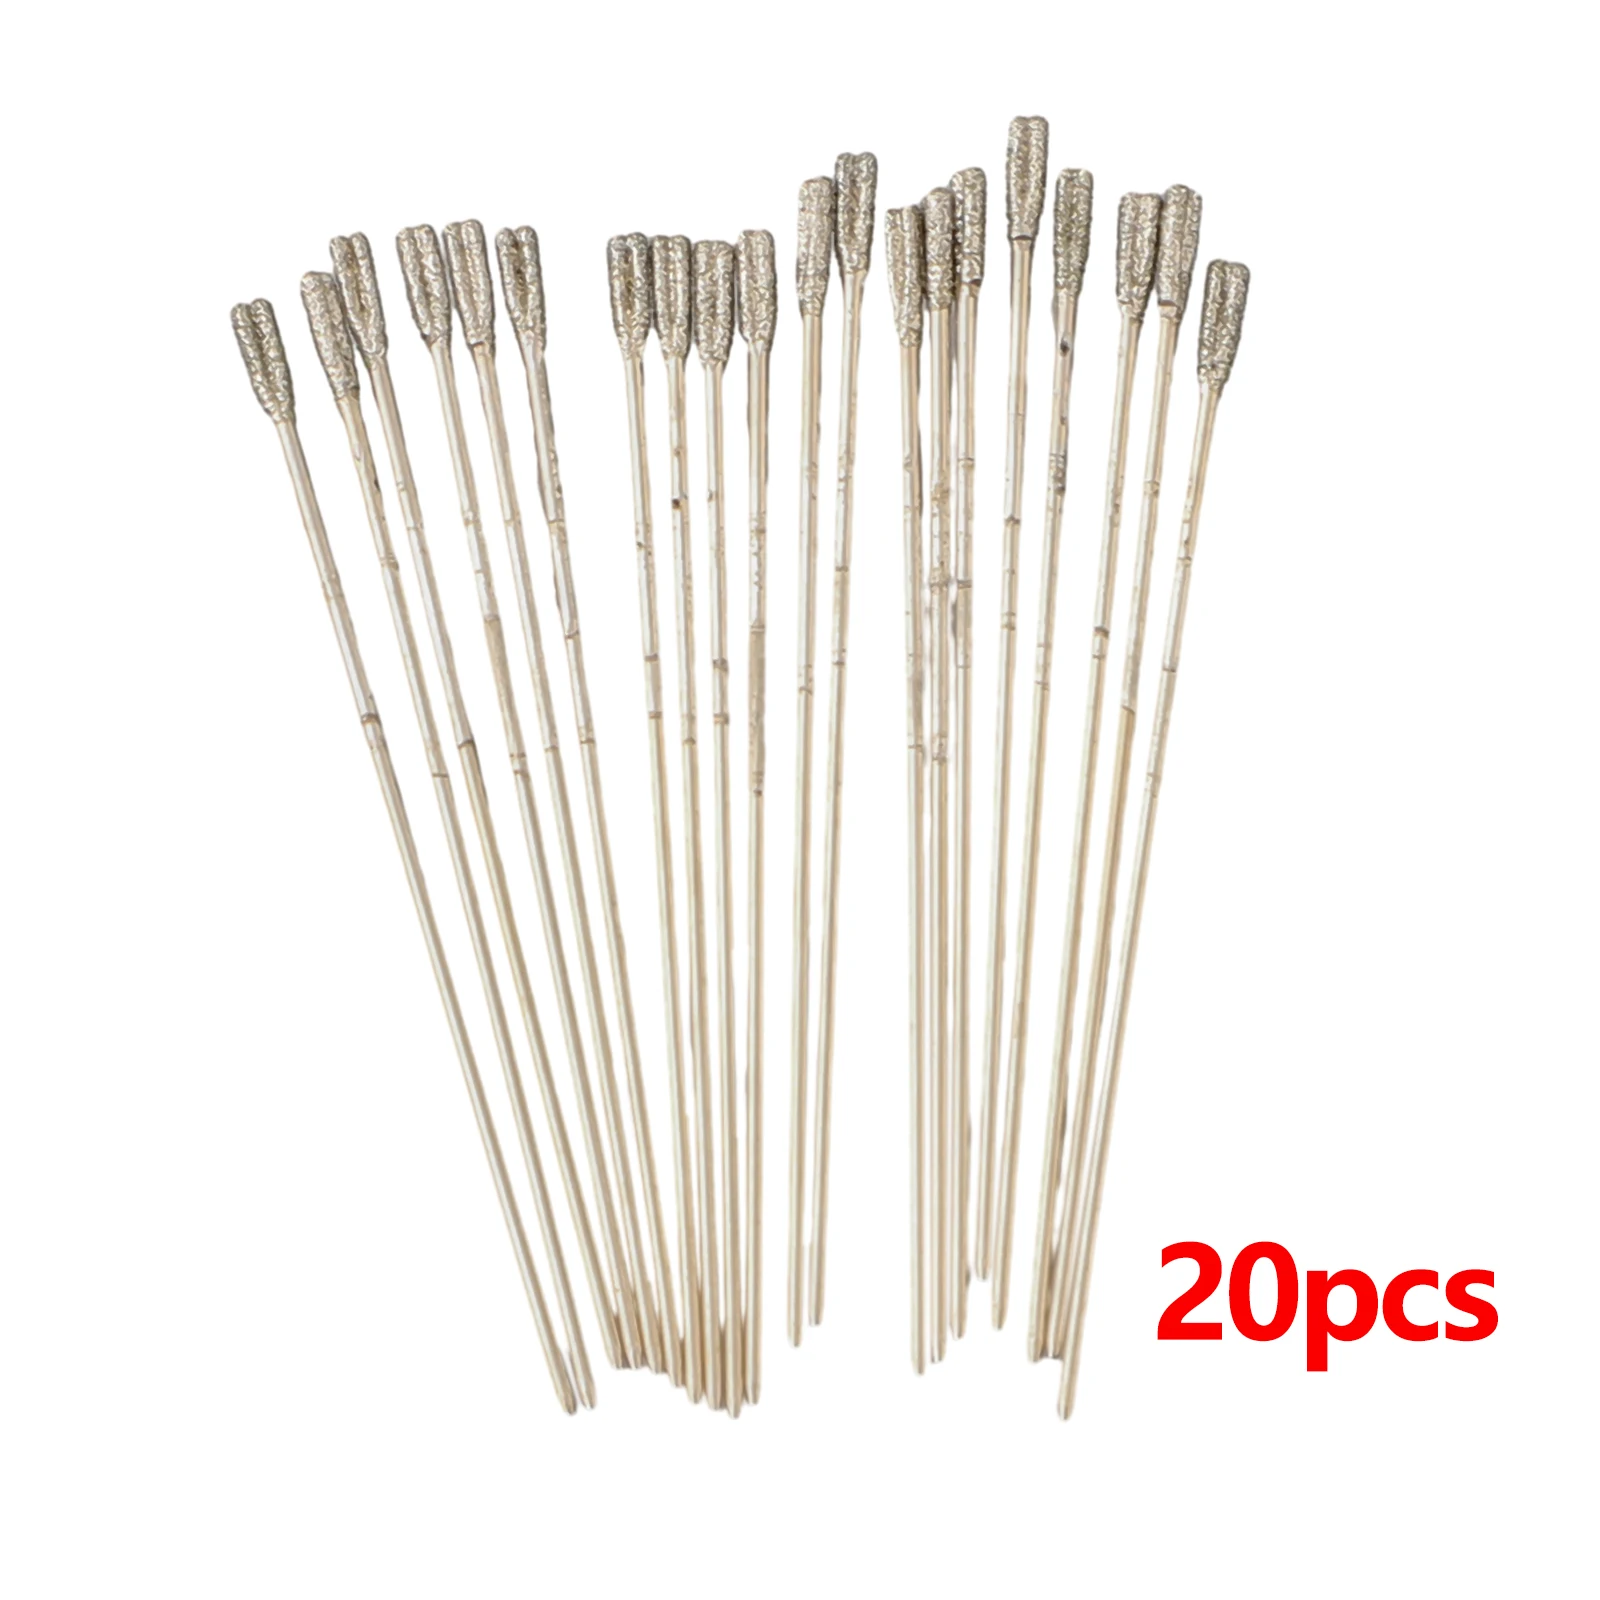 

20pcs 1mm Diamond Coated Lapidary Drill Bits Solid Bits Needle For Jewelry Agate Jade Stone Crystal Ceramic Glass Drilling